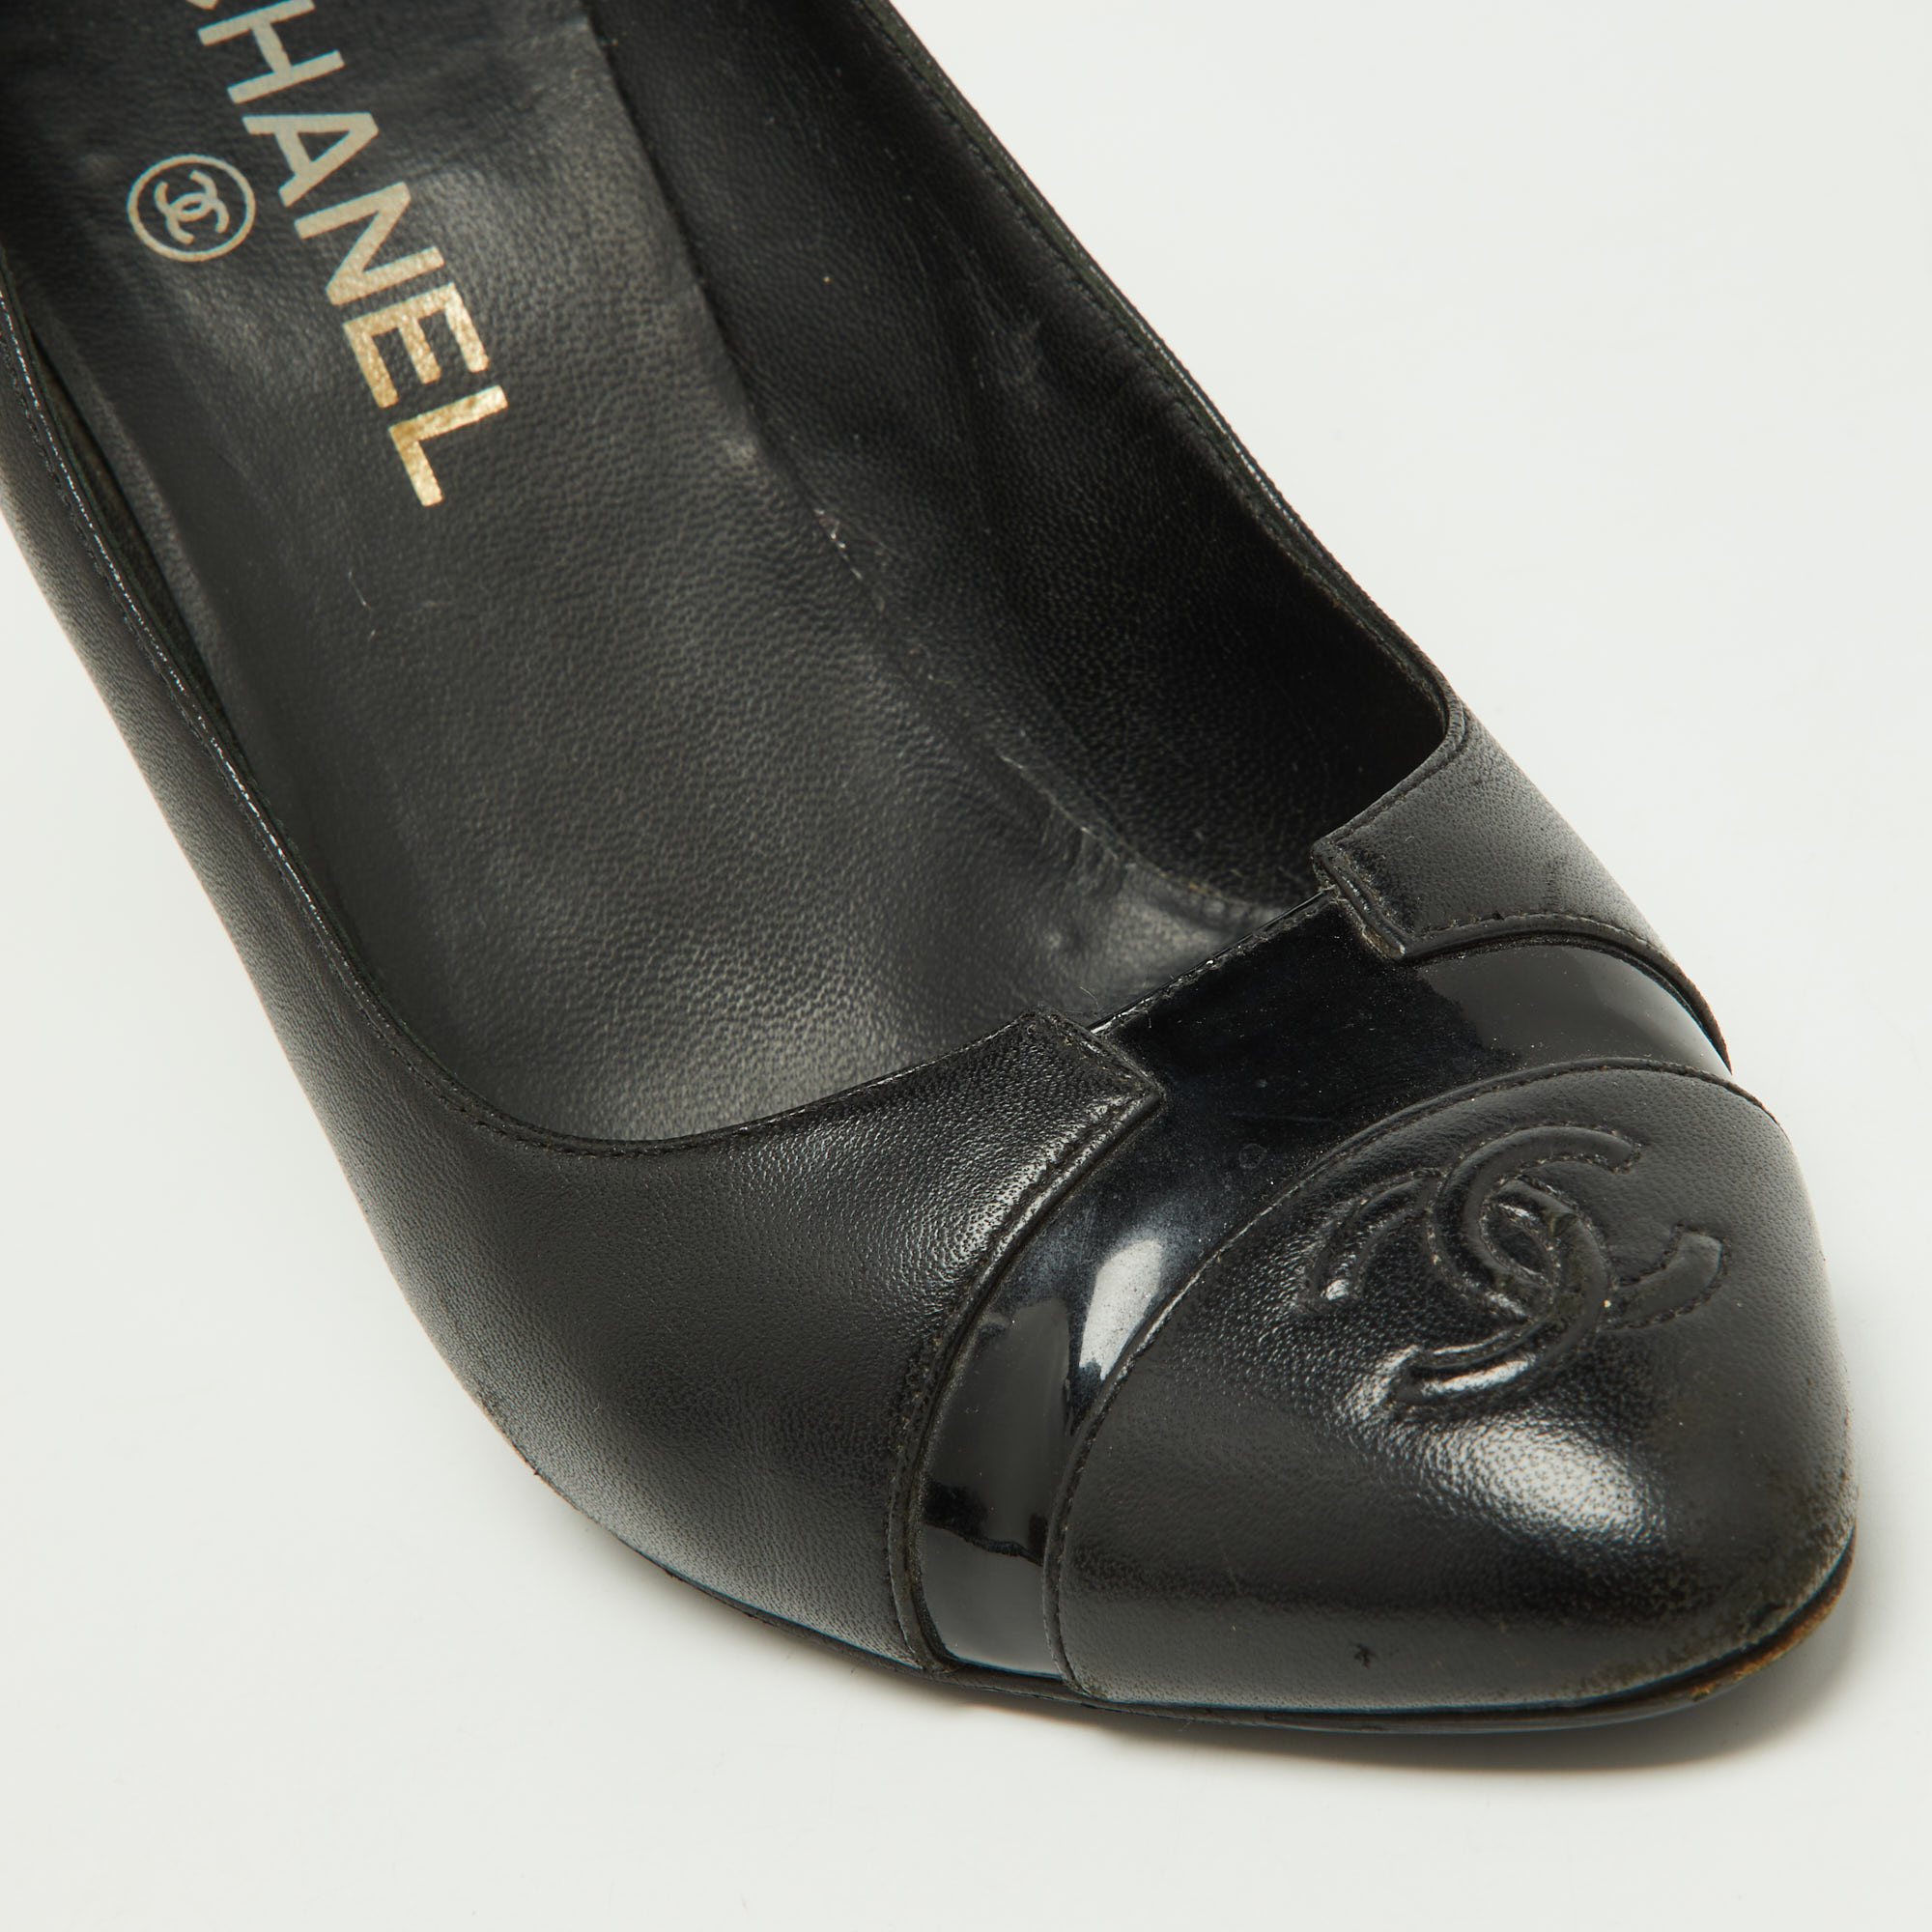 Chanel Black/Gold Patent And Leather CC Cap Toe Pumps Size 39.5